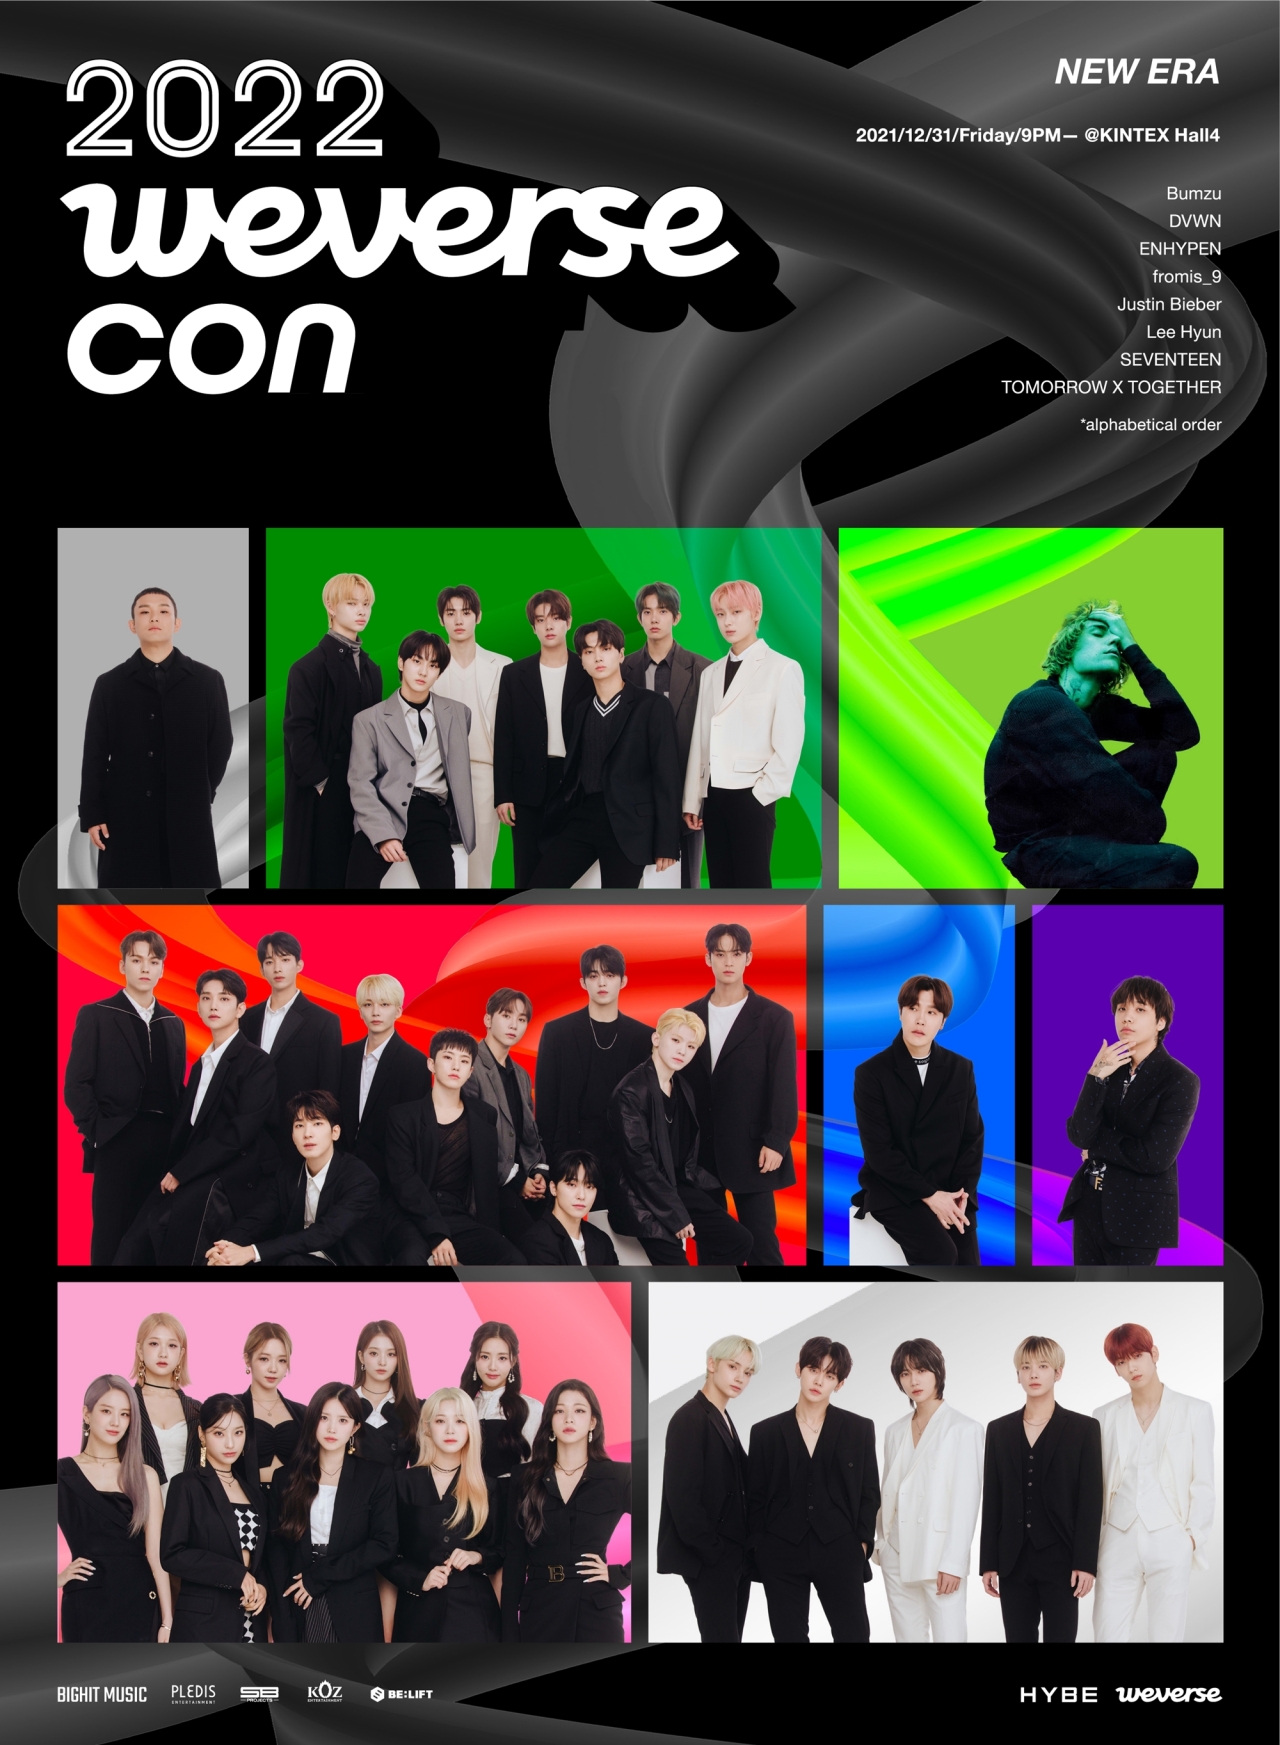 An artwork for “2022 Weverse Con” (Hybe)